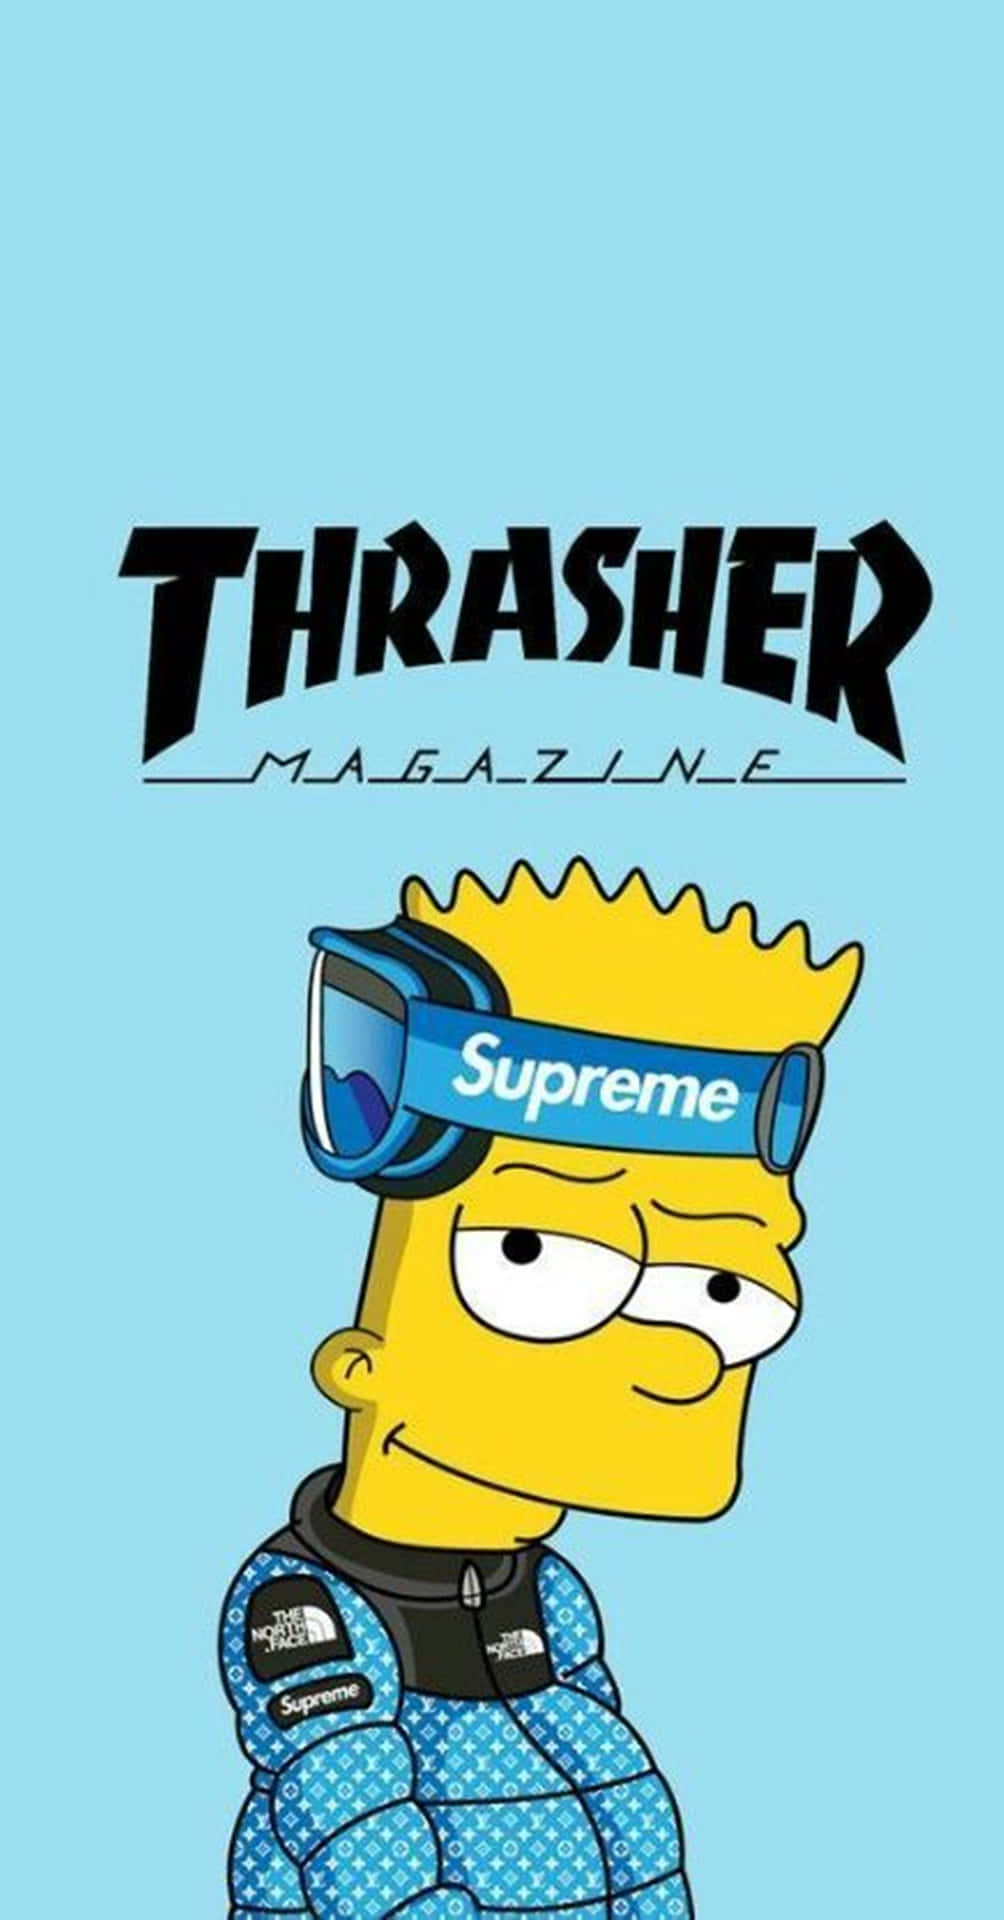 Thrasher Magazine Cover With A Cartoon Character